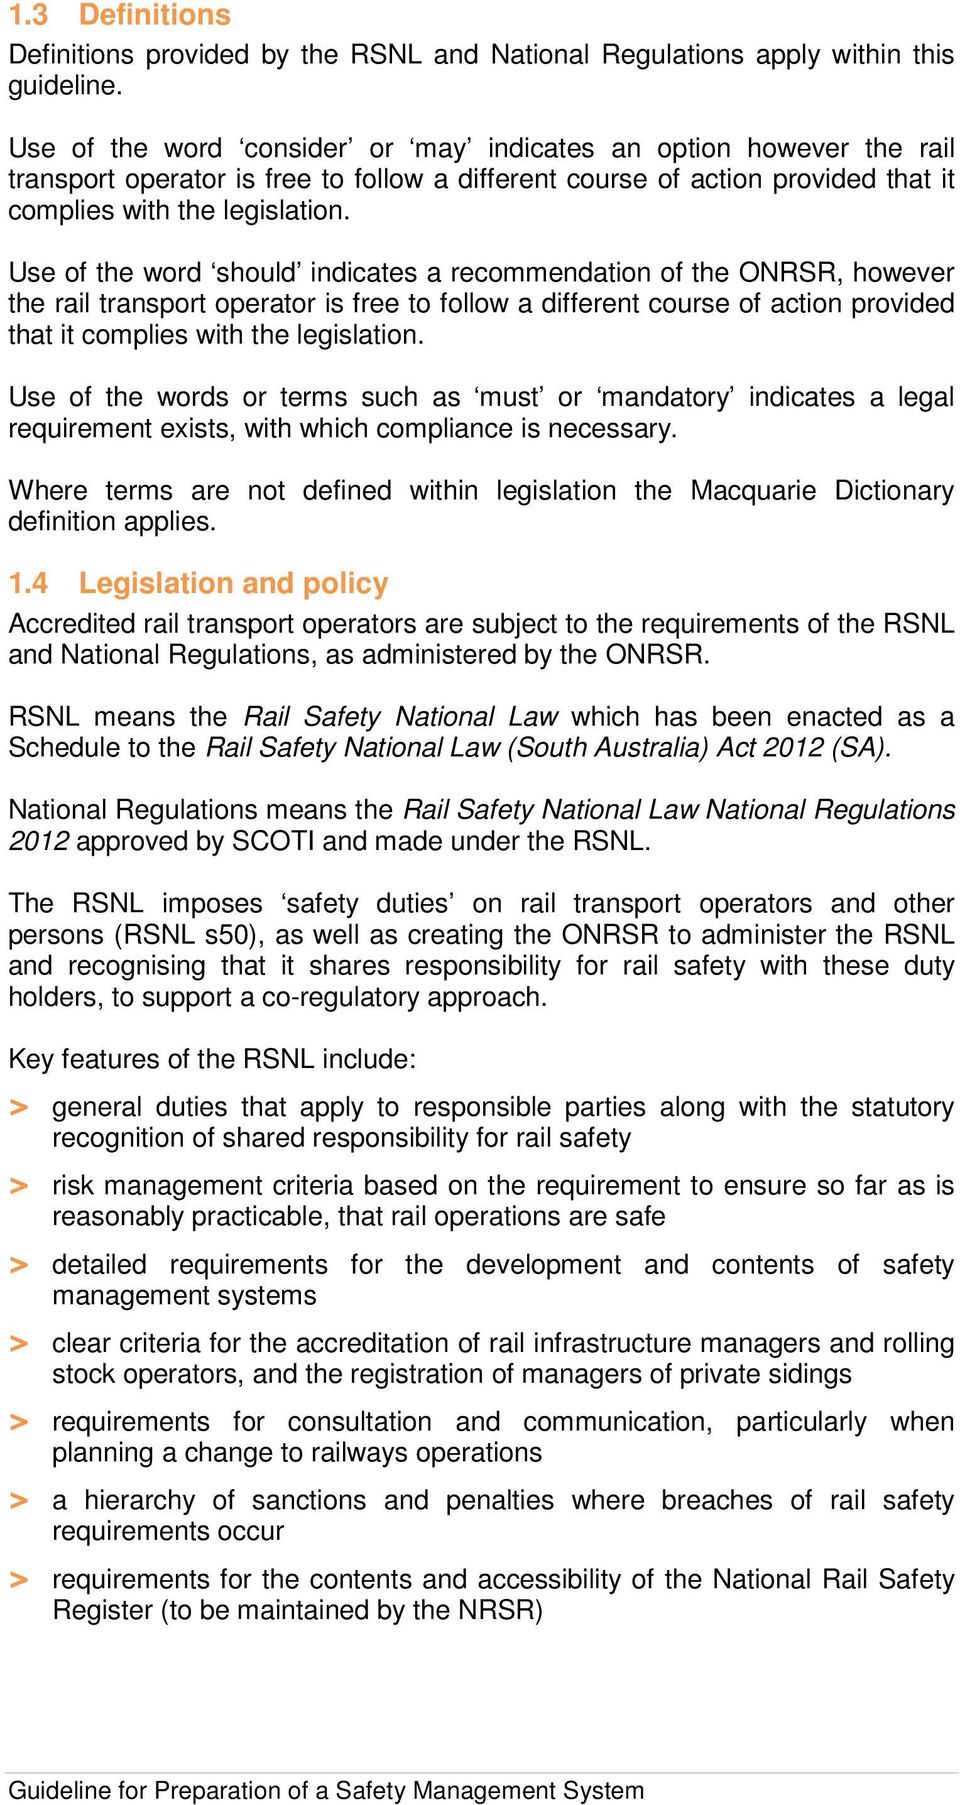 Use of the word should indicates a recommendation of the ONRSR, however the rail transport operator is free to follow a different course of action provided that it complies with the legislation.